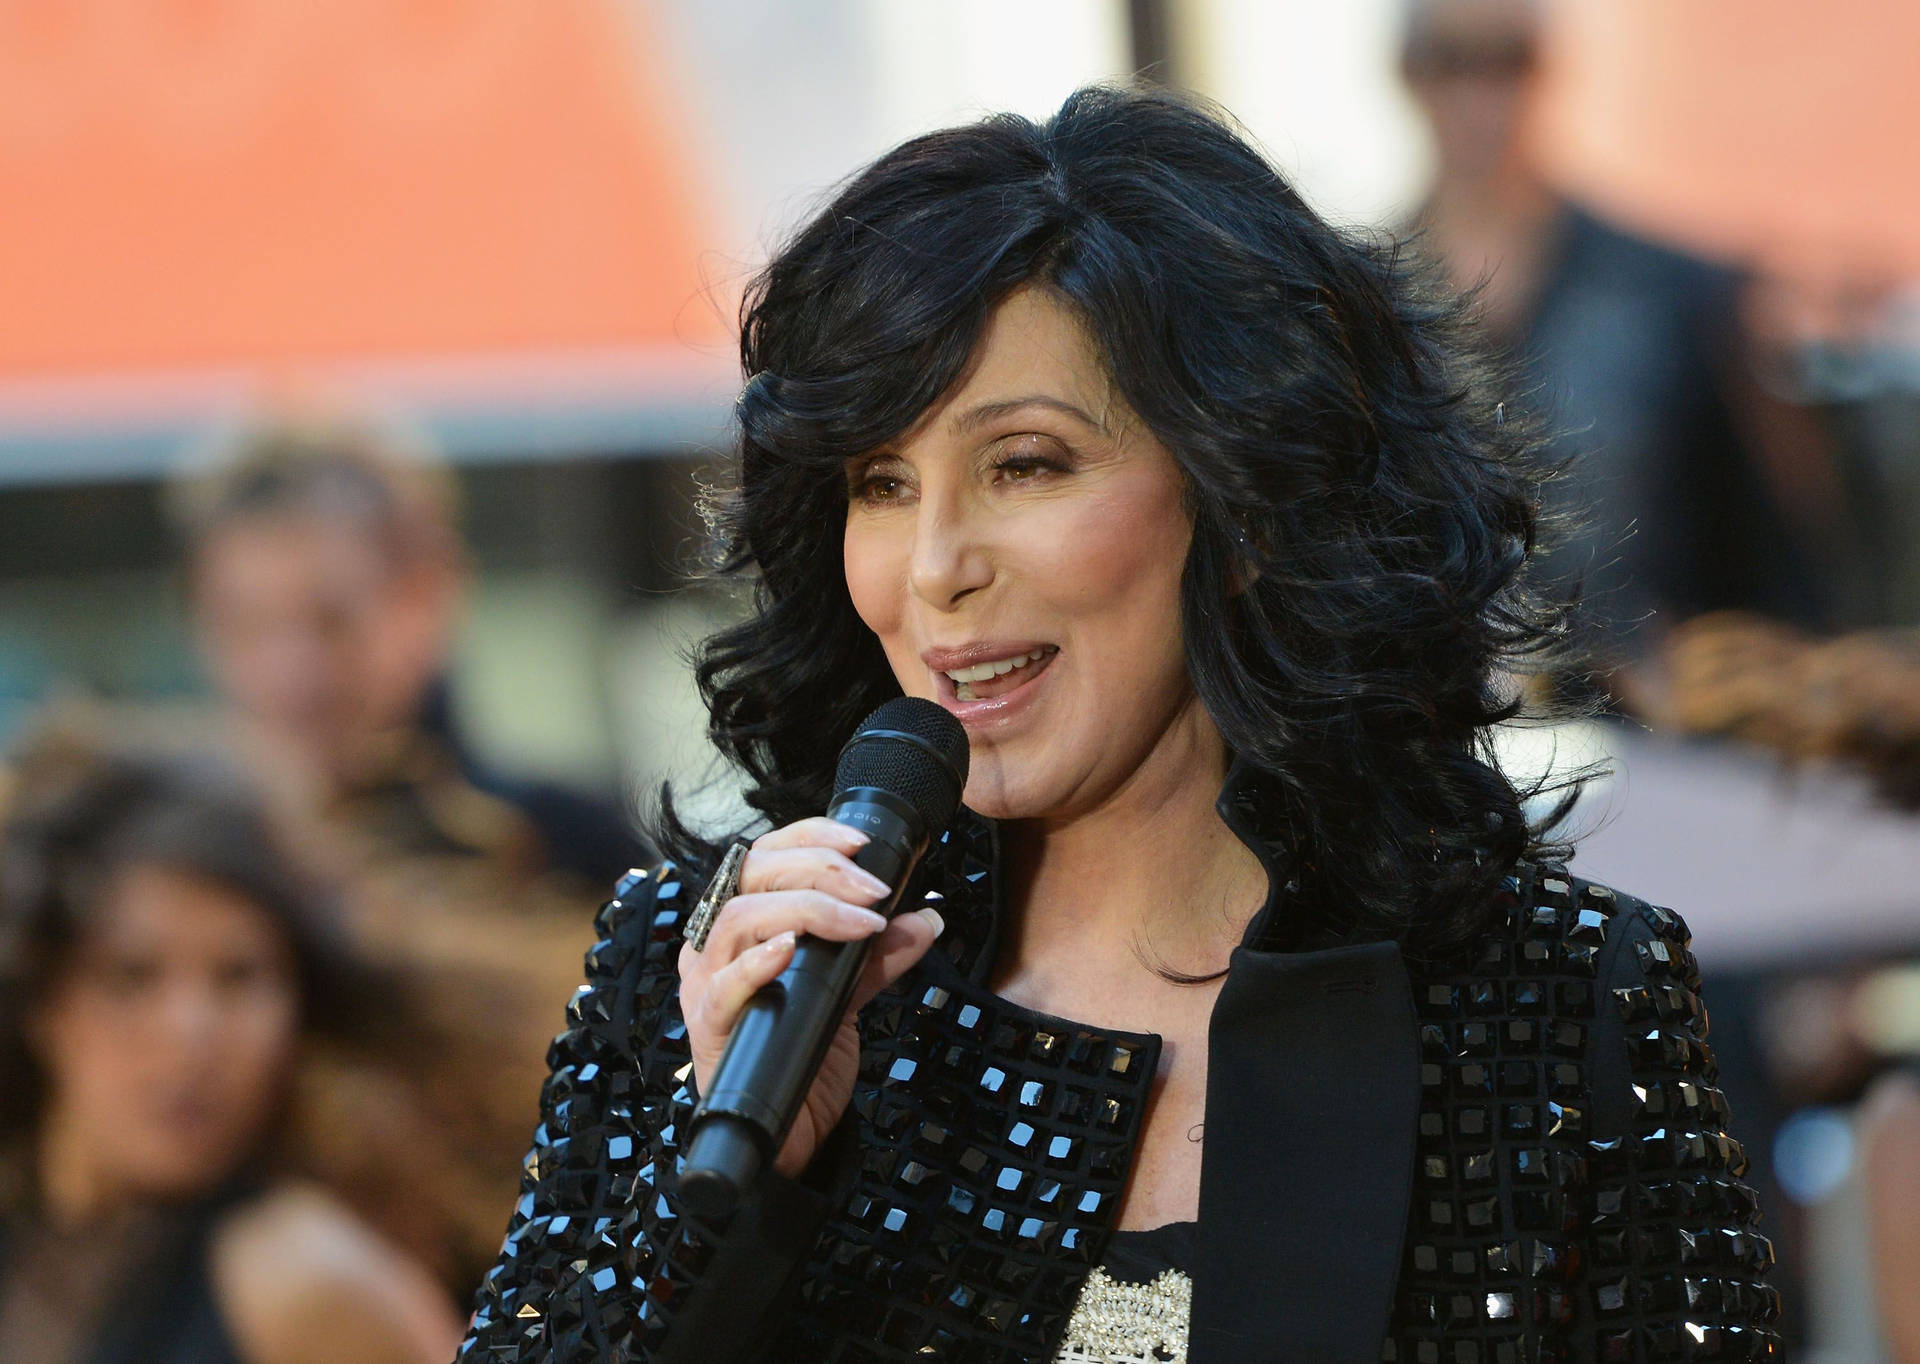 Legendary Singer Cher Performing on Stage with Microphone Wallpaper